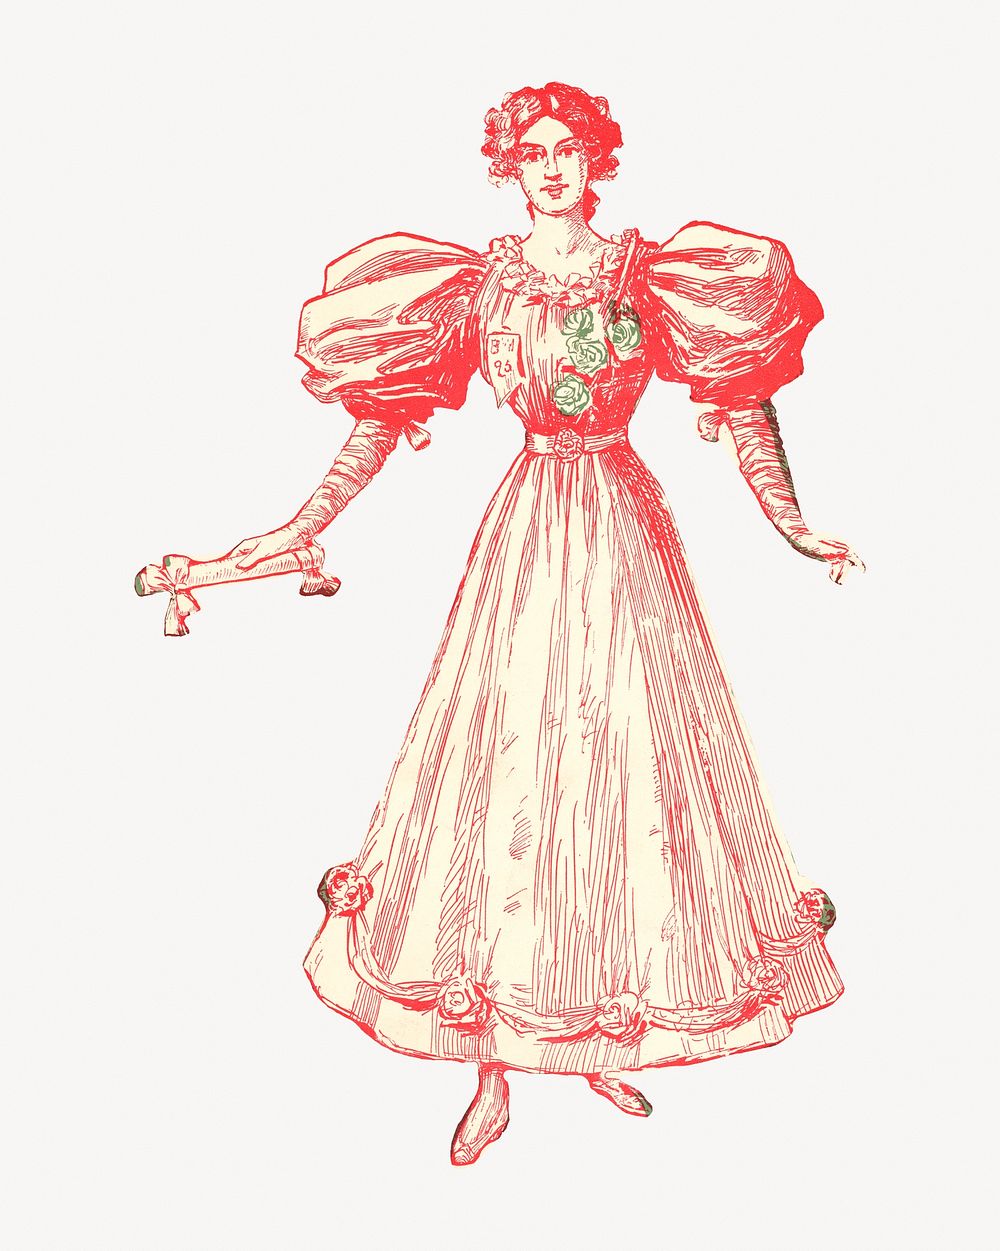 Woman in formal dress illustration.  Remixed by rawpixel.